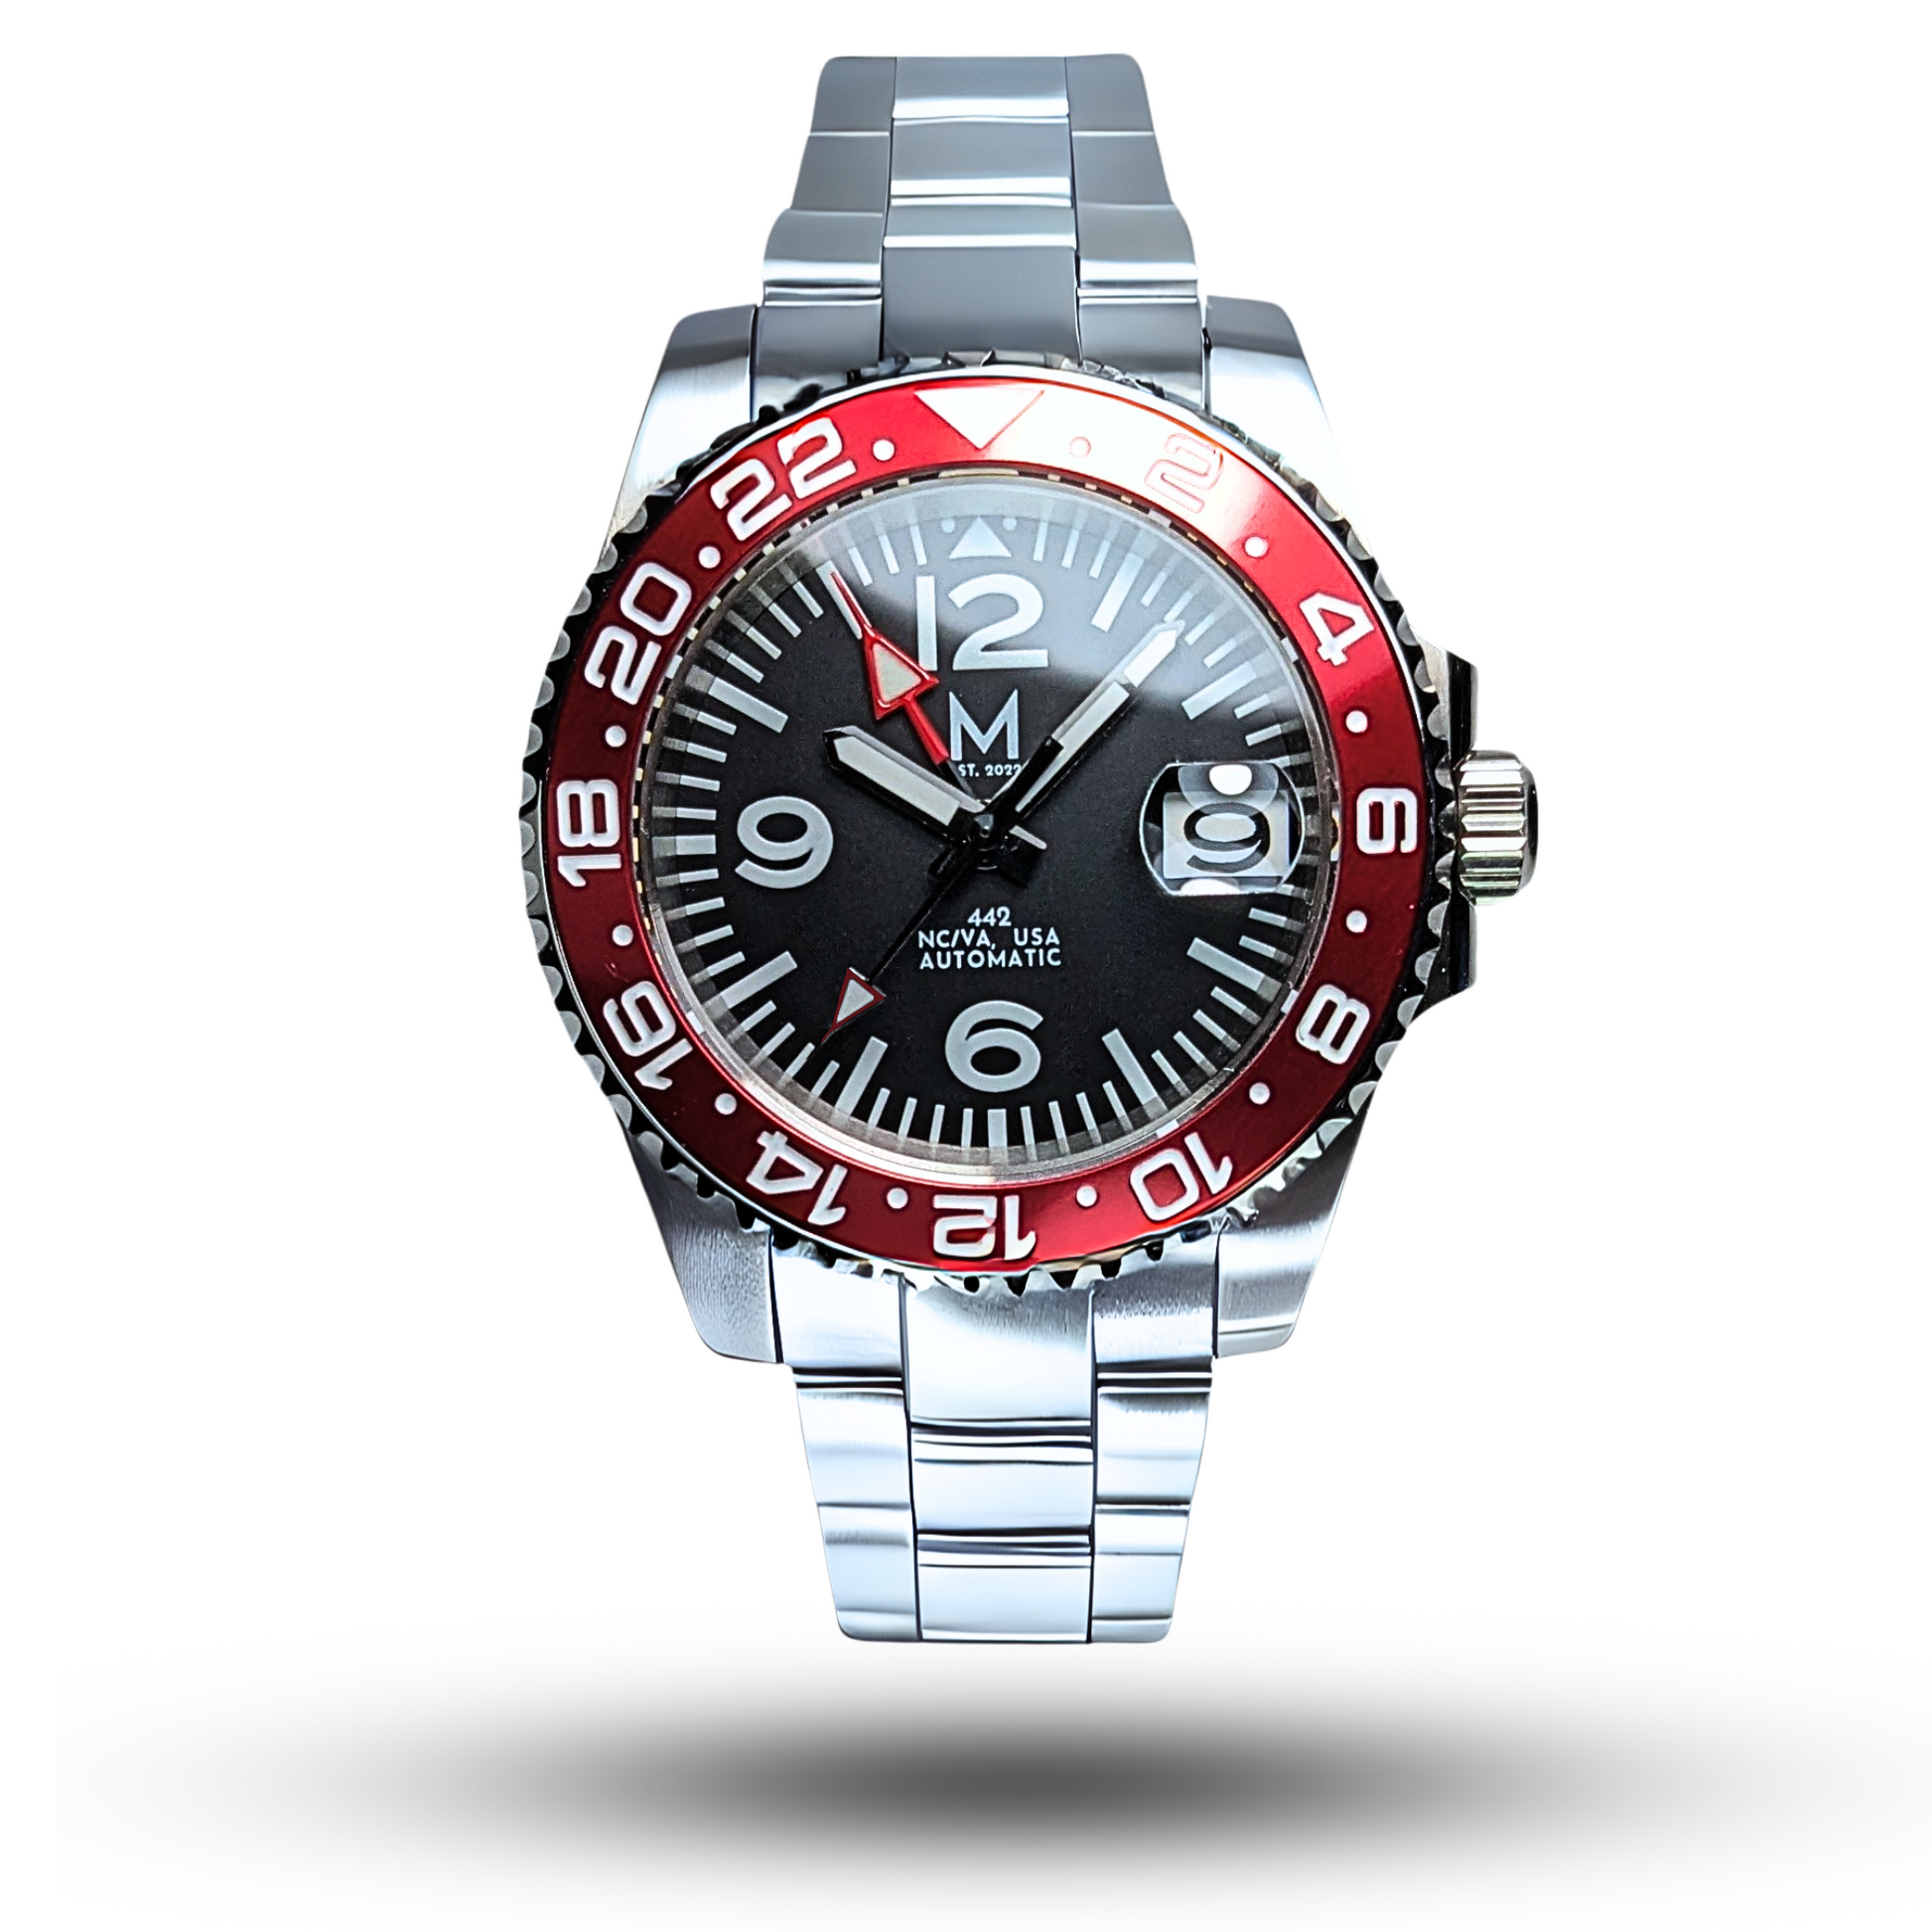 Stylish Men's GMT: Buy The 442 GMT Watch - Monterey Watch Co